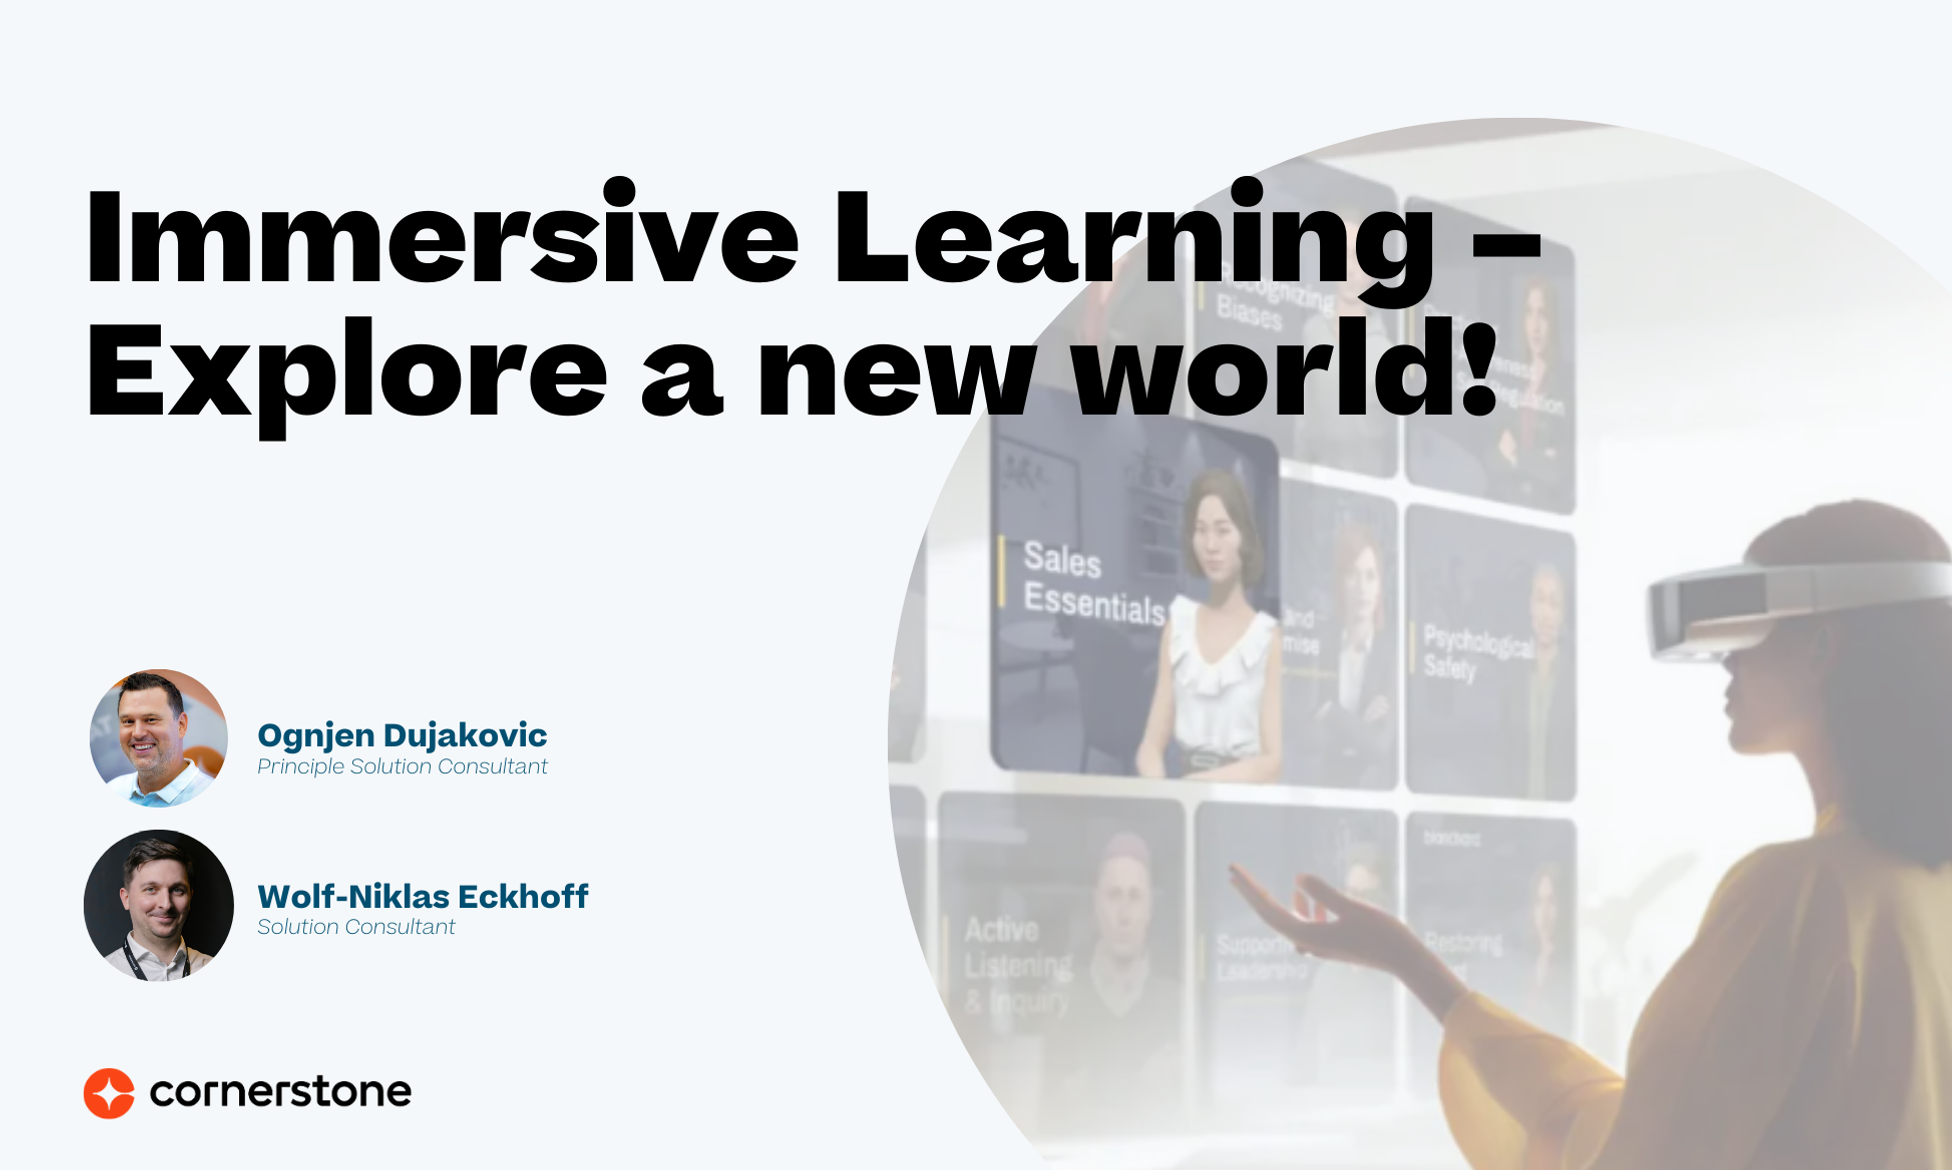 Immersive Learning – Explore a new world!